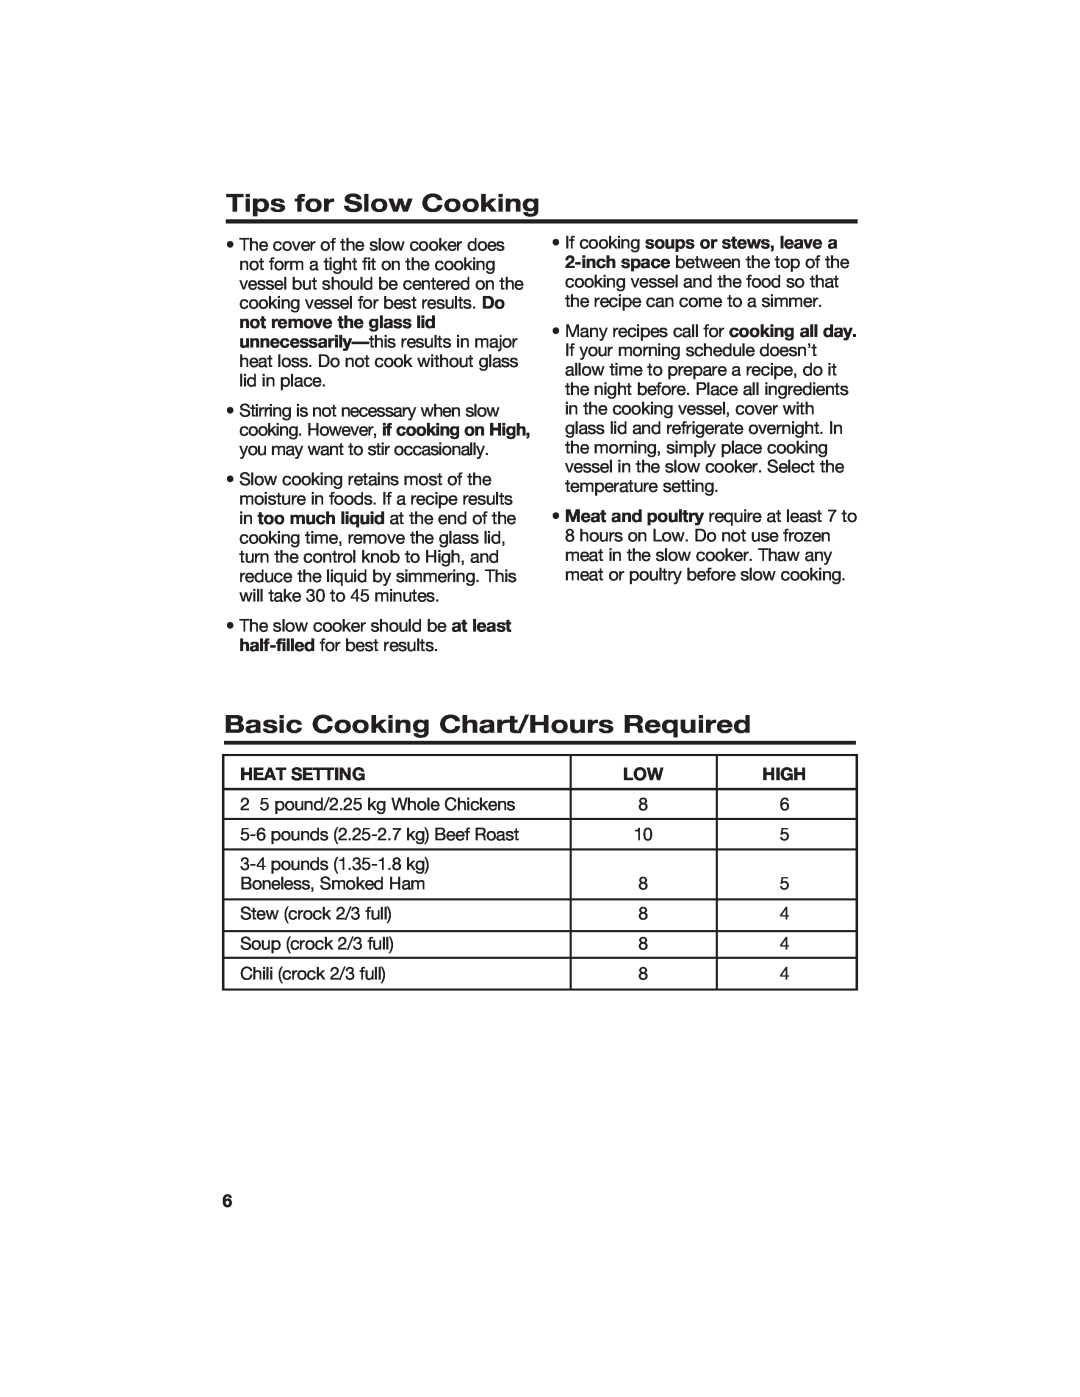 Hamilton Beach 840133300 Tips for Slow Cooking, Basic Cooking Chart/Hours Required, If cooking soups or stews, leave a 